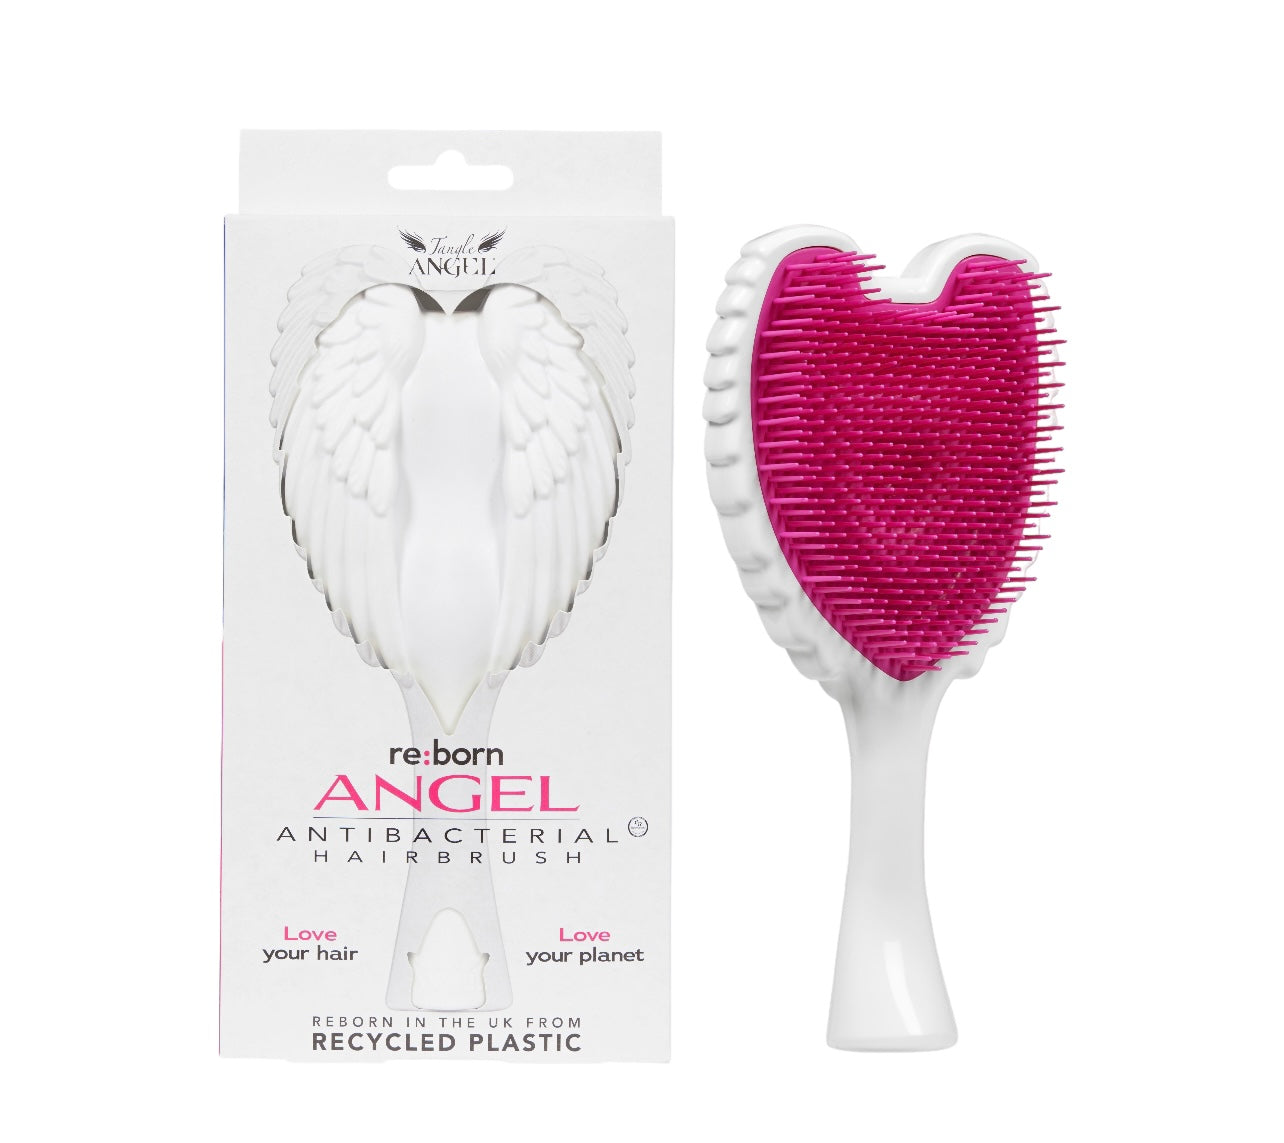 Tangle Angel RE:BORN White Fuchsia reborn in the UK from recycled plastic, antibacterial hairbrush, love your hair, love your planet Phoenix Nationale